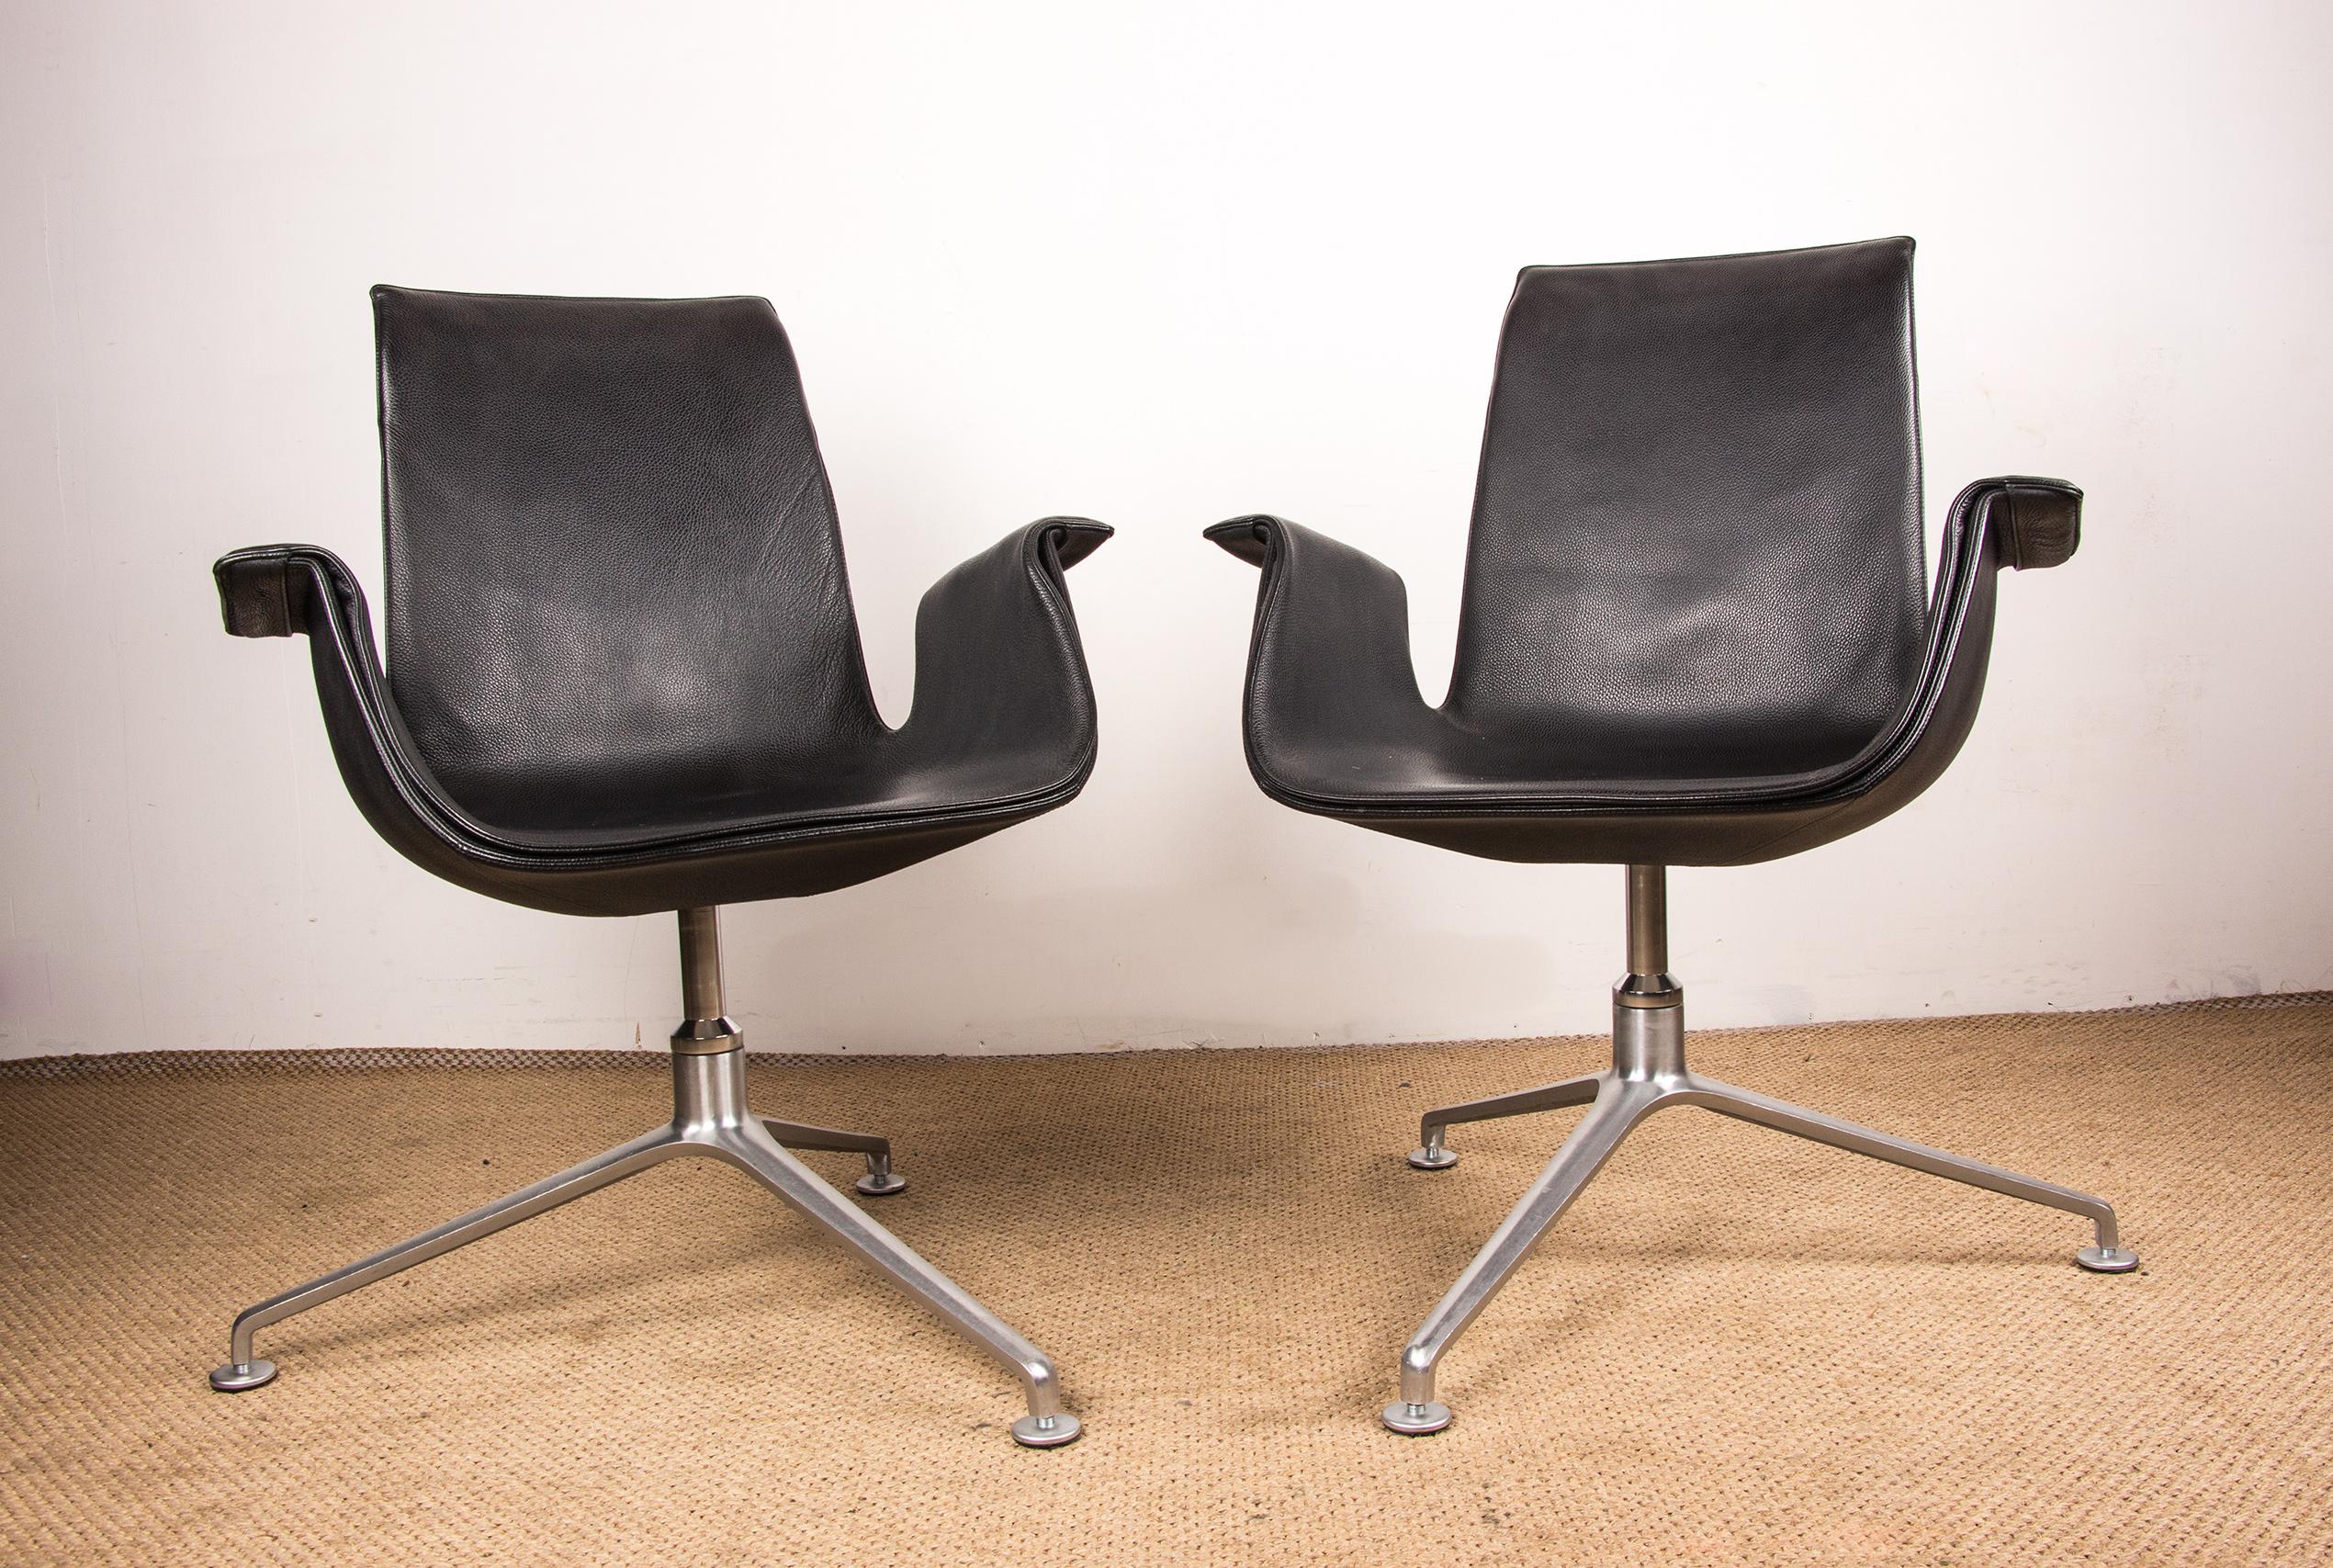 2 Danish deskchairs, Leather and steel, “Tulip chair” by Fabricius & Kalsthom. For Sale 4